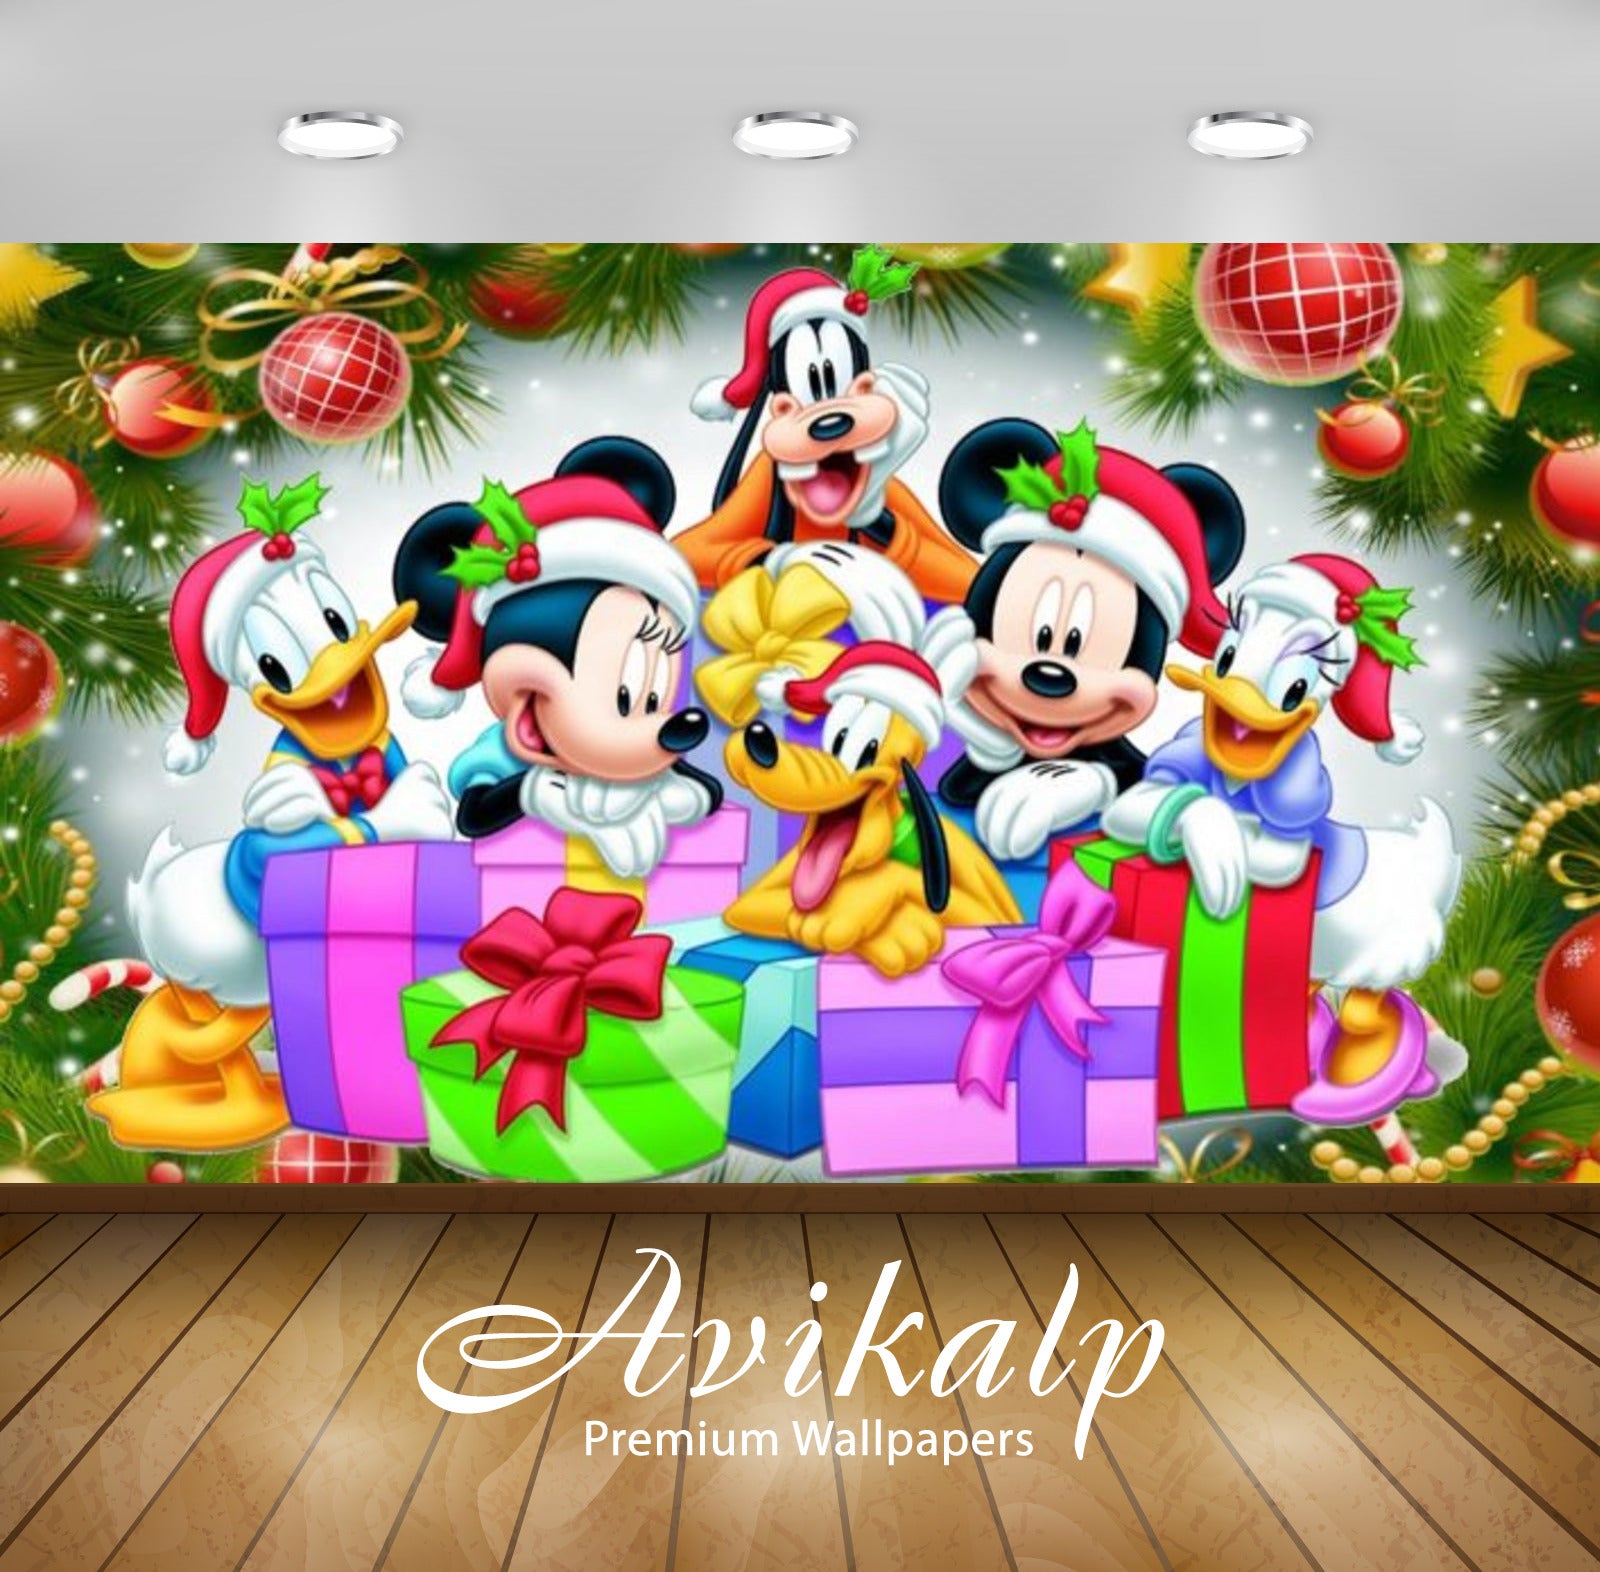 Avikalp Exclusive Awi2091 Merry Christmas Than Mickey And Friends  Full HD Wallpapers for Living roo